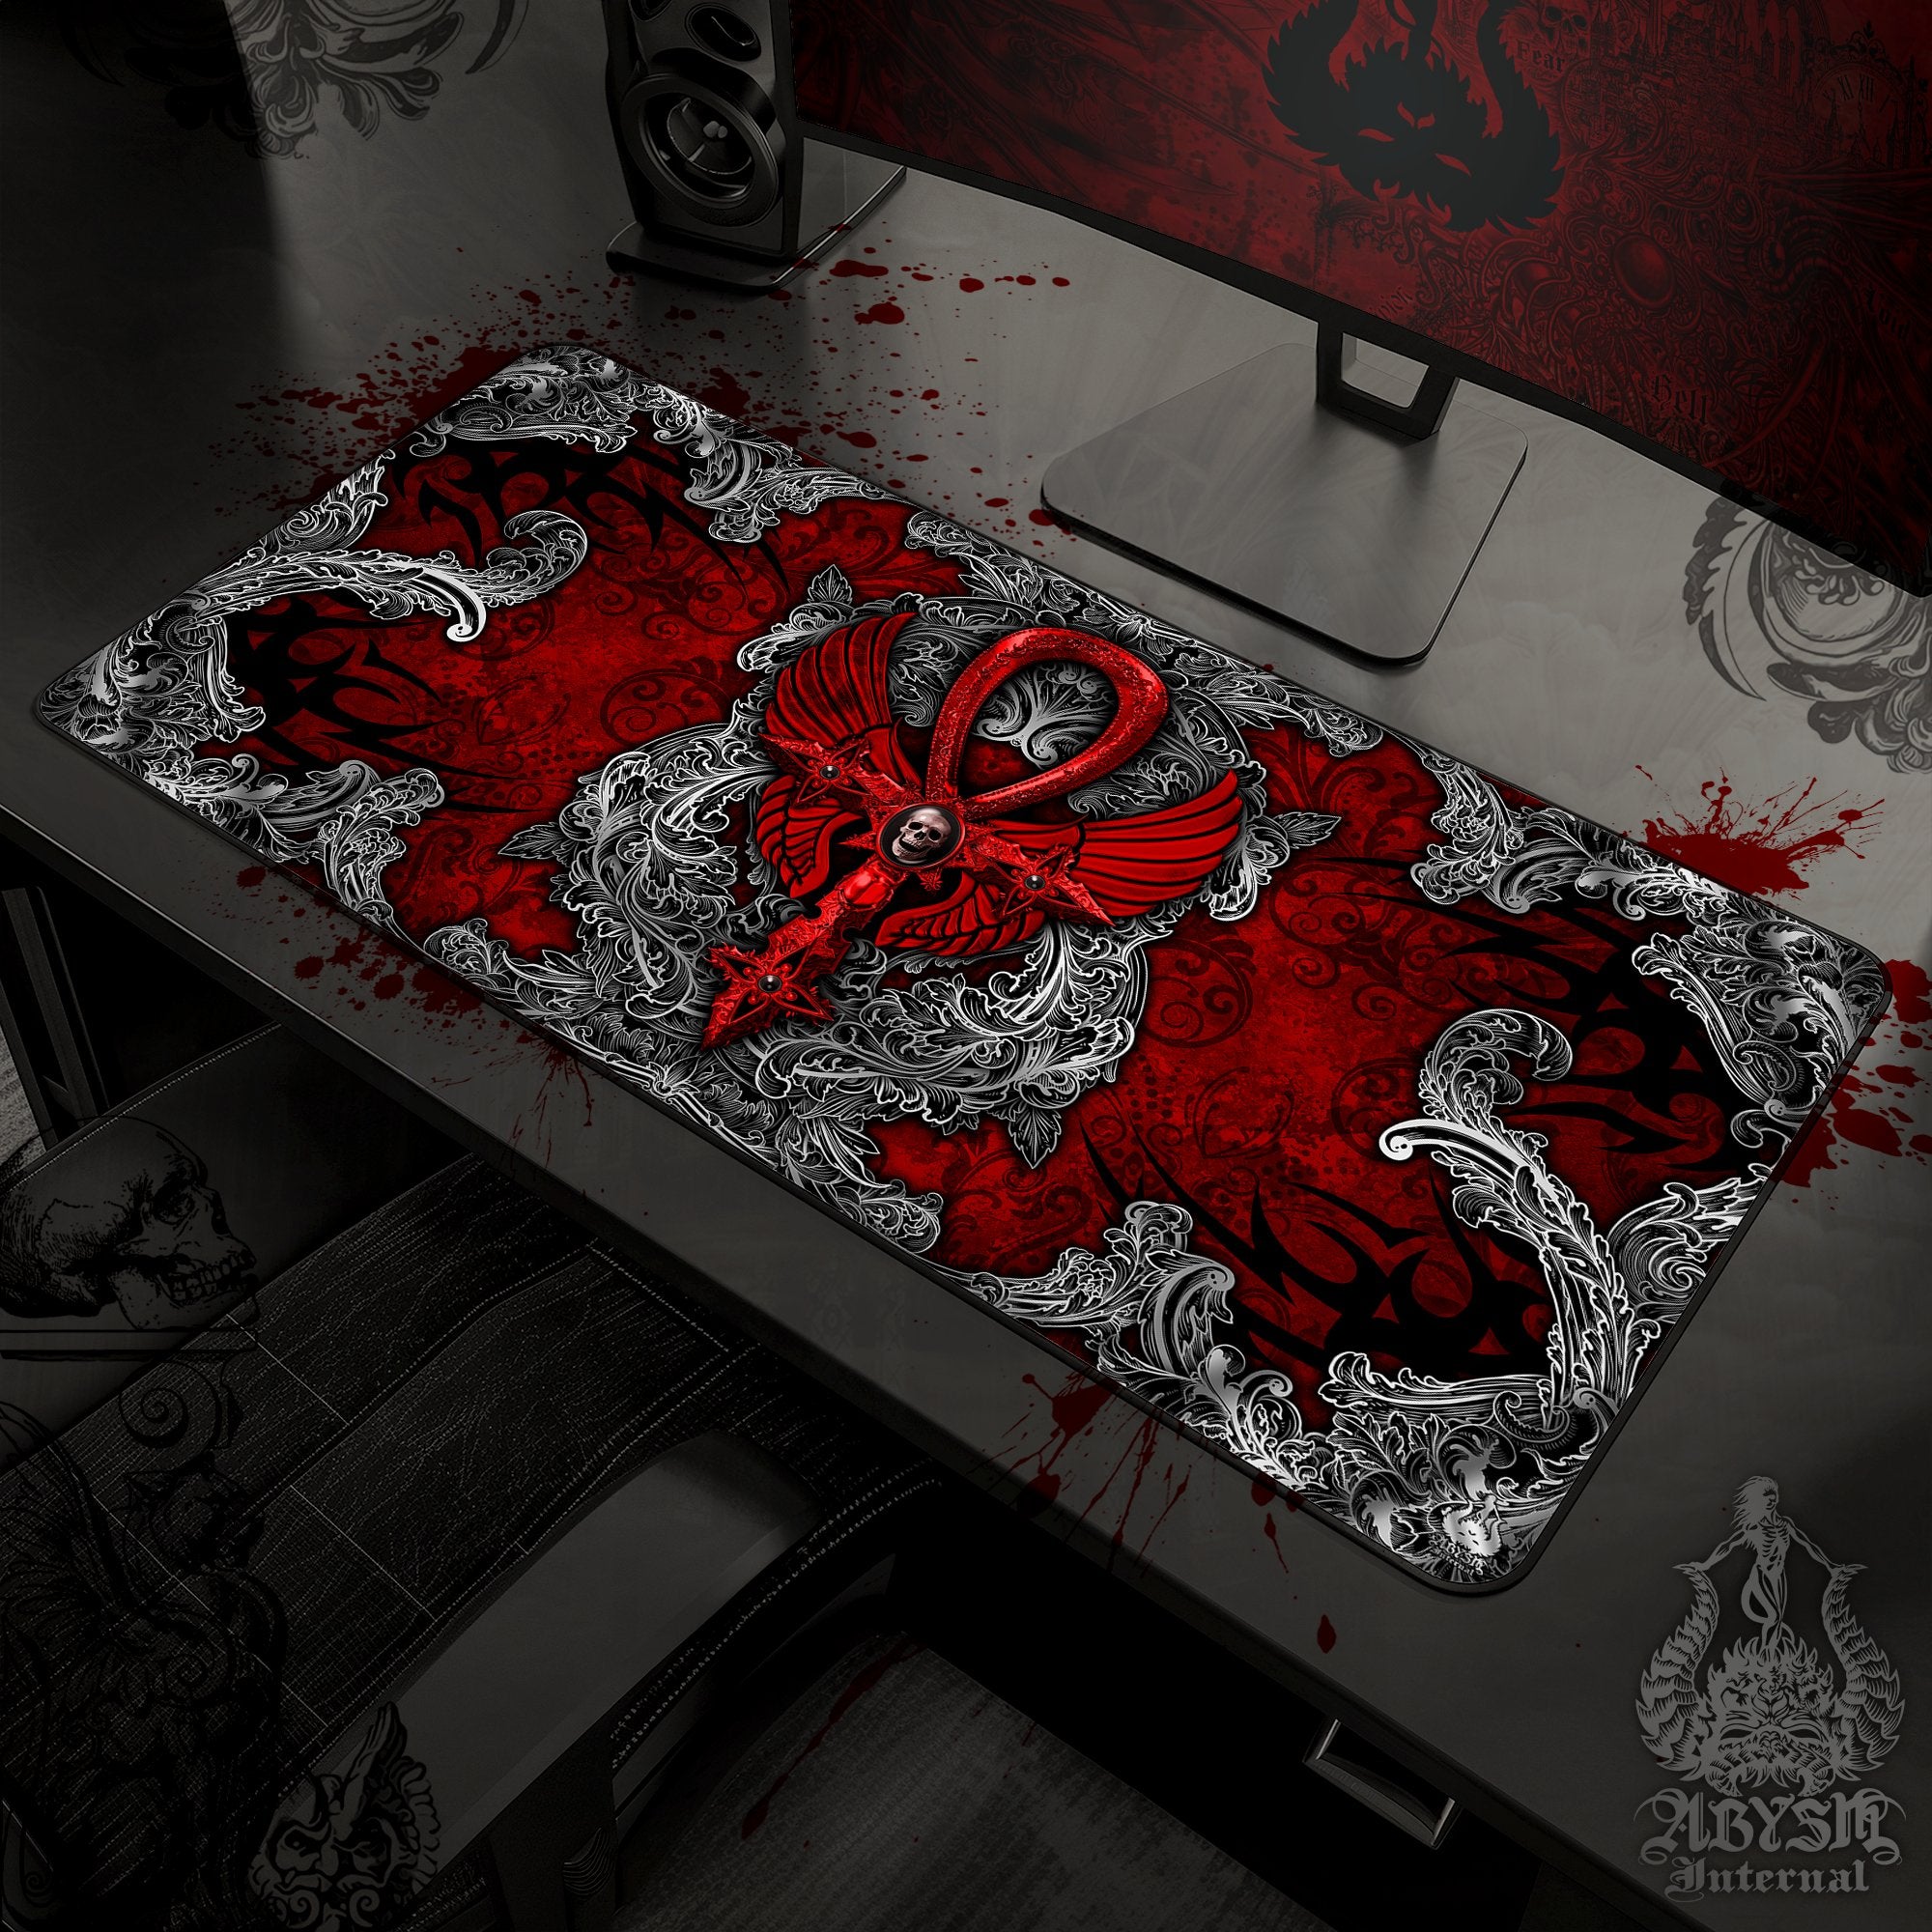 Gothic Gaming Mouse Pad, Goth Desk Mat, Silver Ankh Table Protector Cover, Black and Red Workpad, Dark Art Print - 2 Colors - Abysm Internal